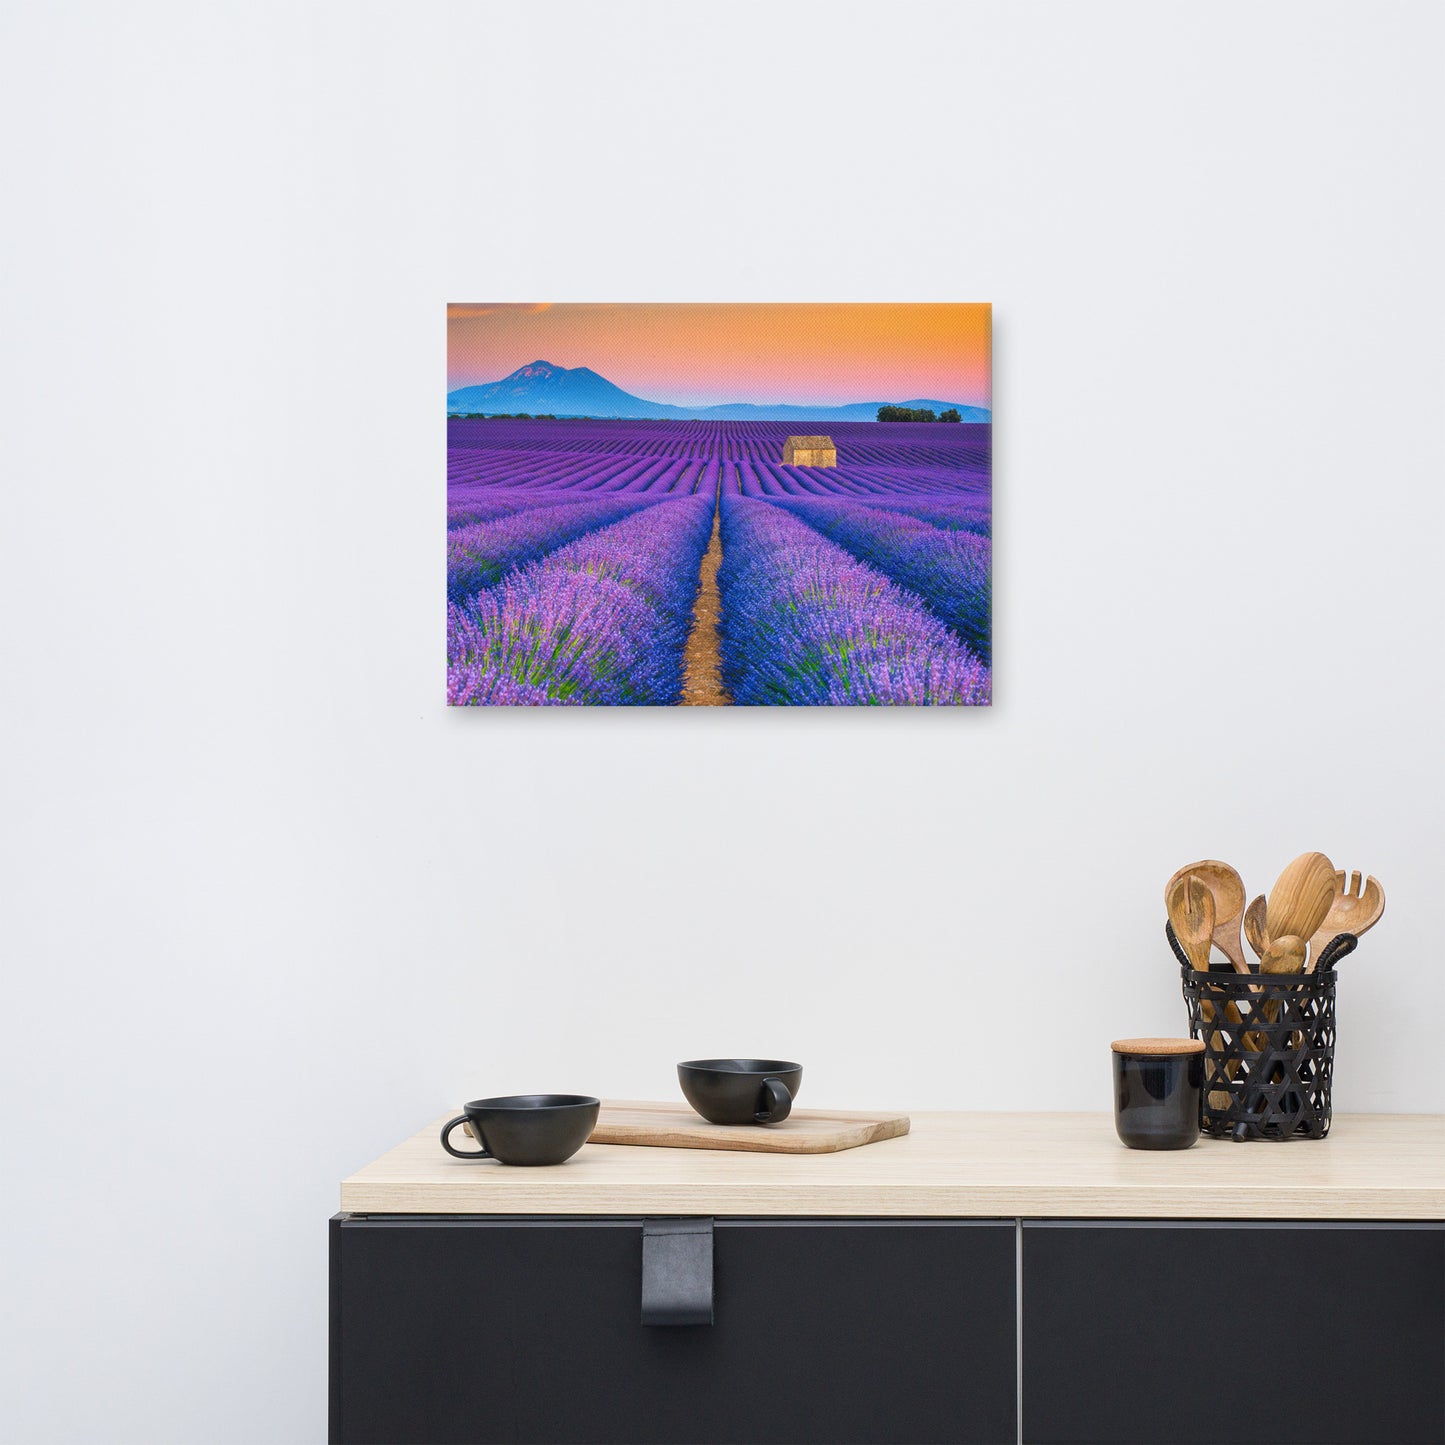 Blooming Lavender Field and Sunset Landscape Photograph Canvas Wall Art Prints